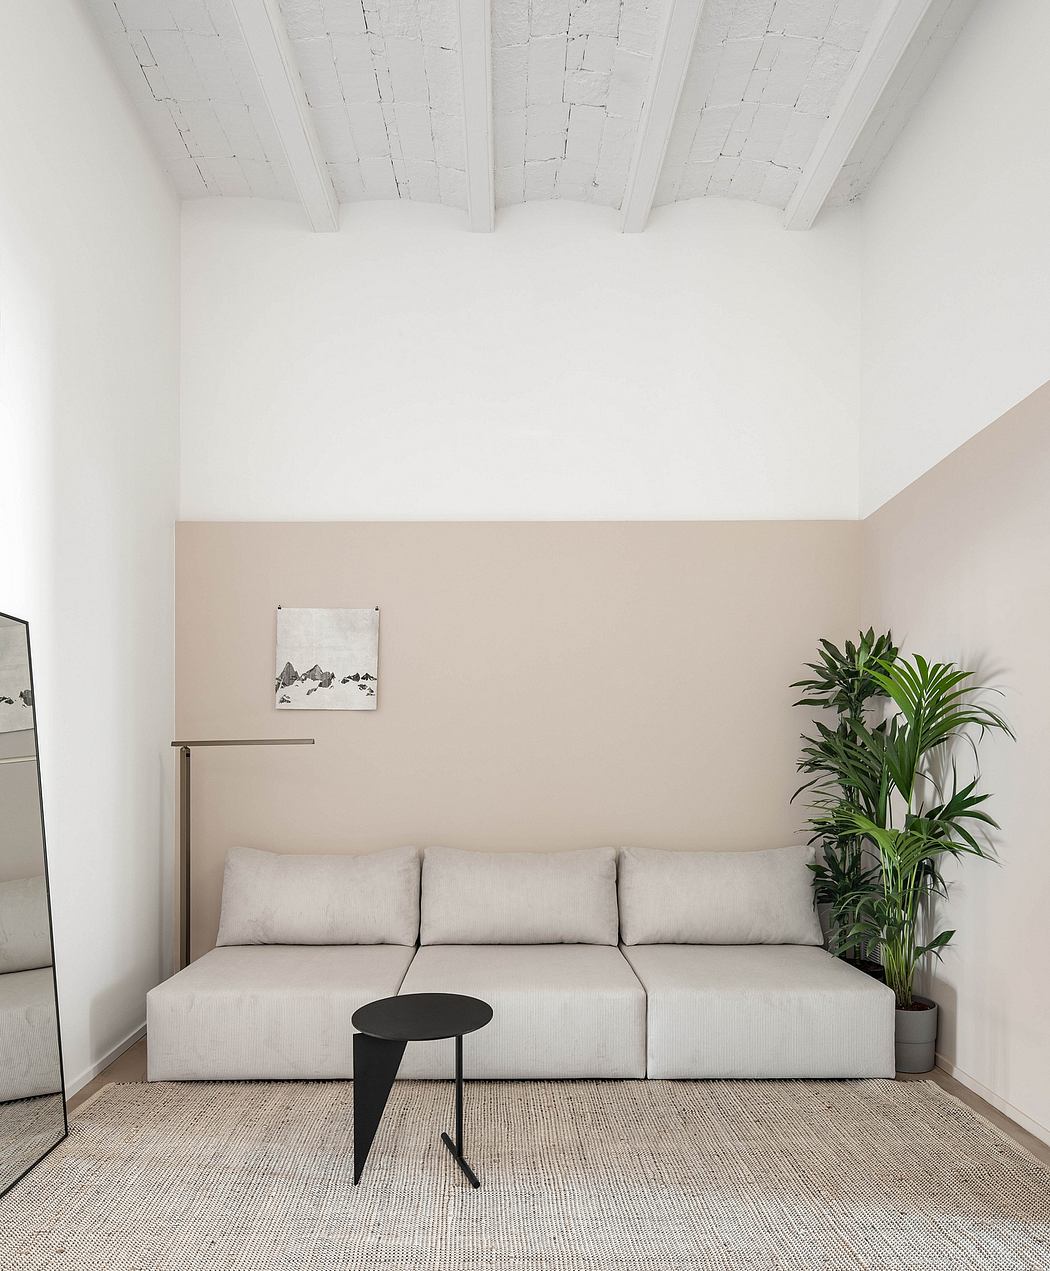 Minimalist corner with white sofa, exposed beams, and green plant.